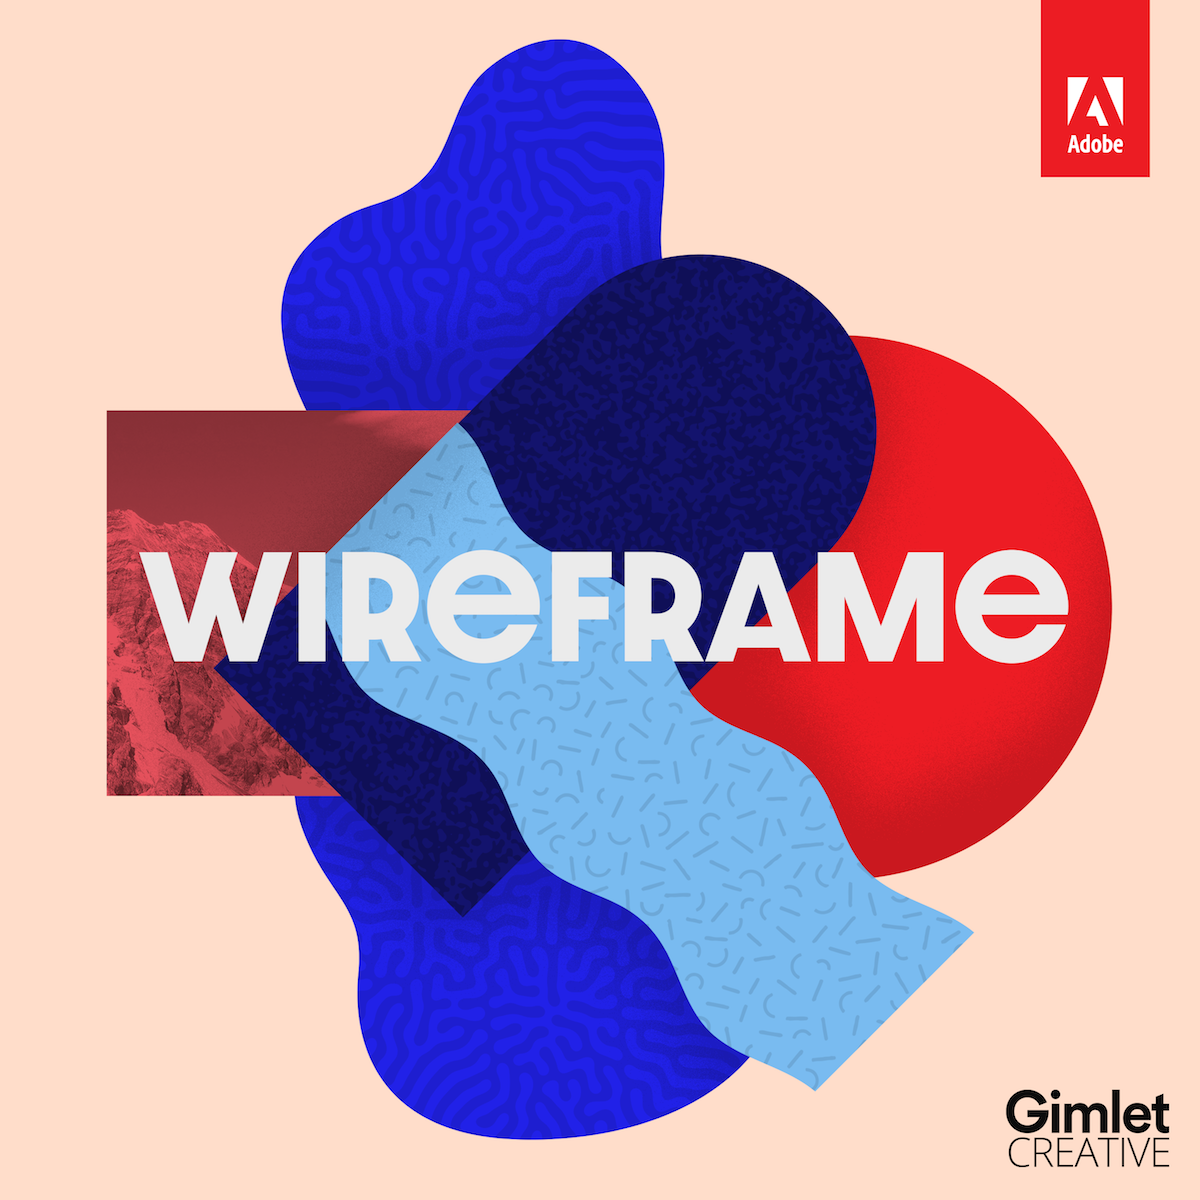 Wireframes idea #33: Wireframe: A High-quality Storytelling Podcast about Design